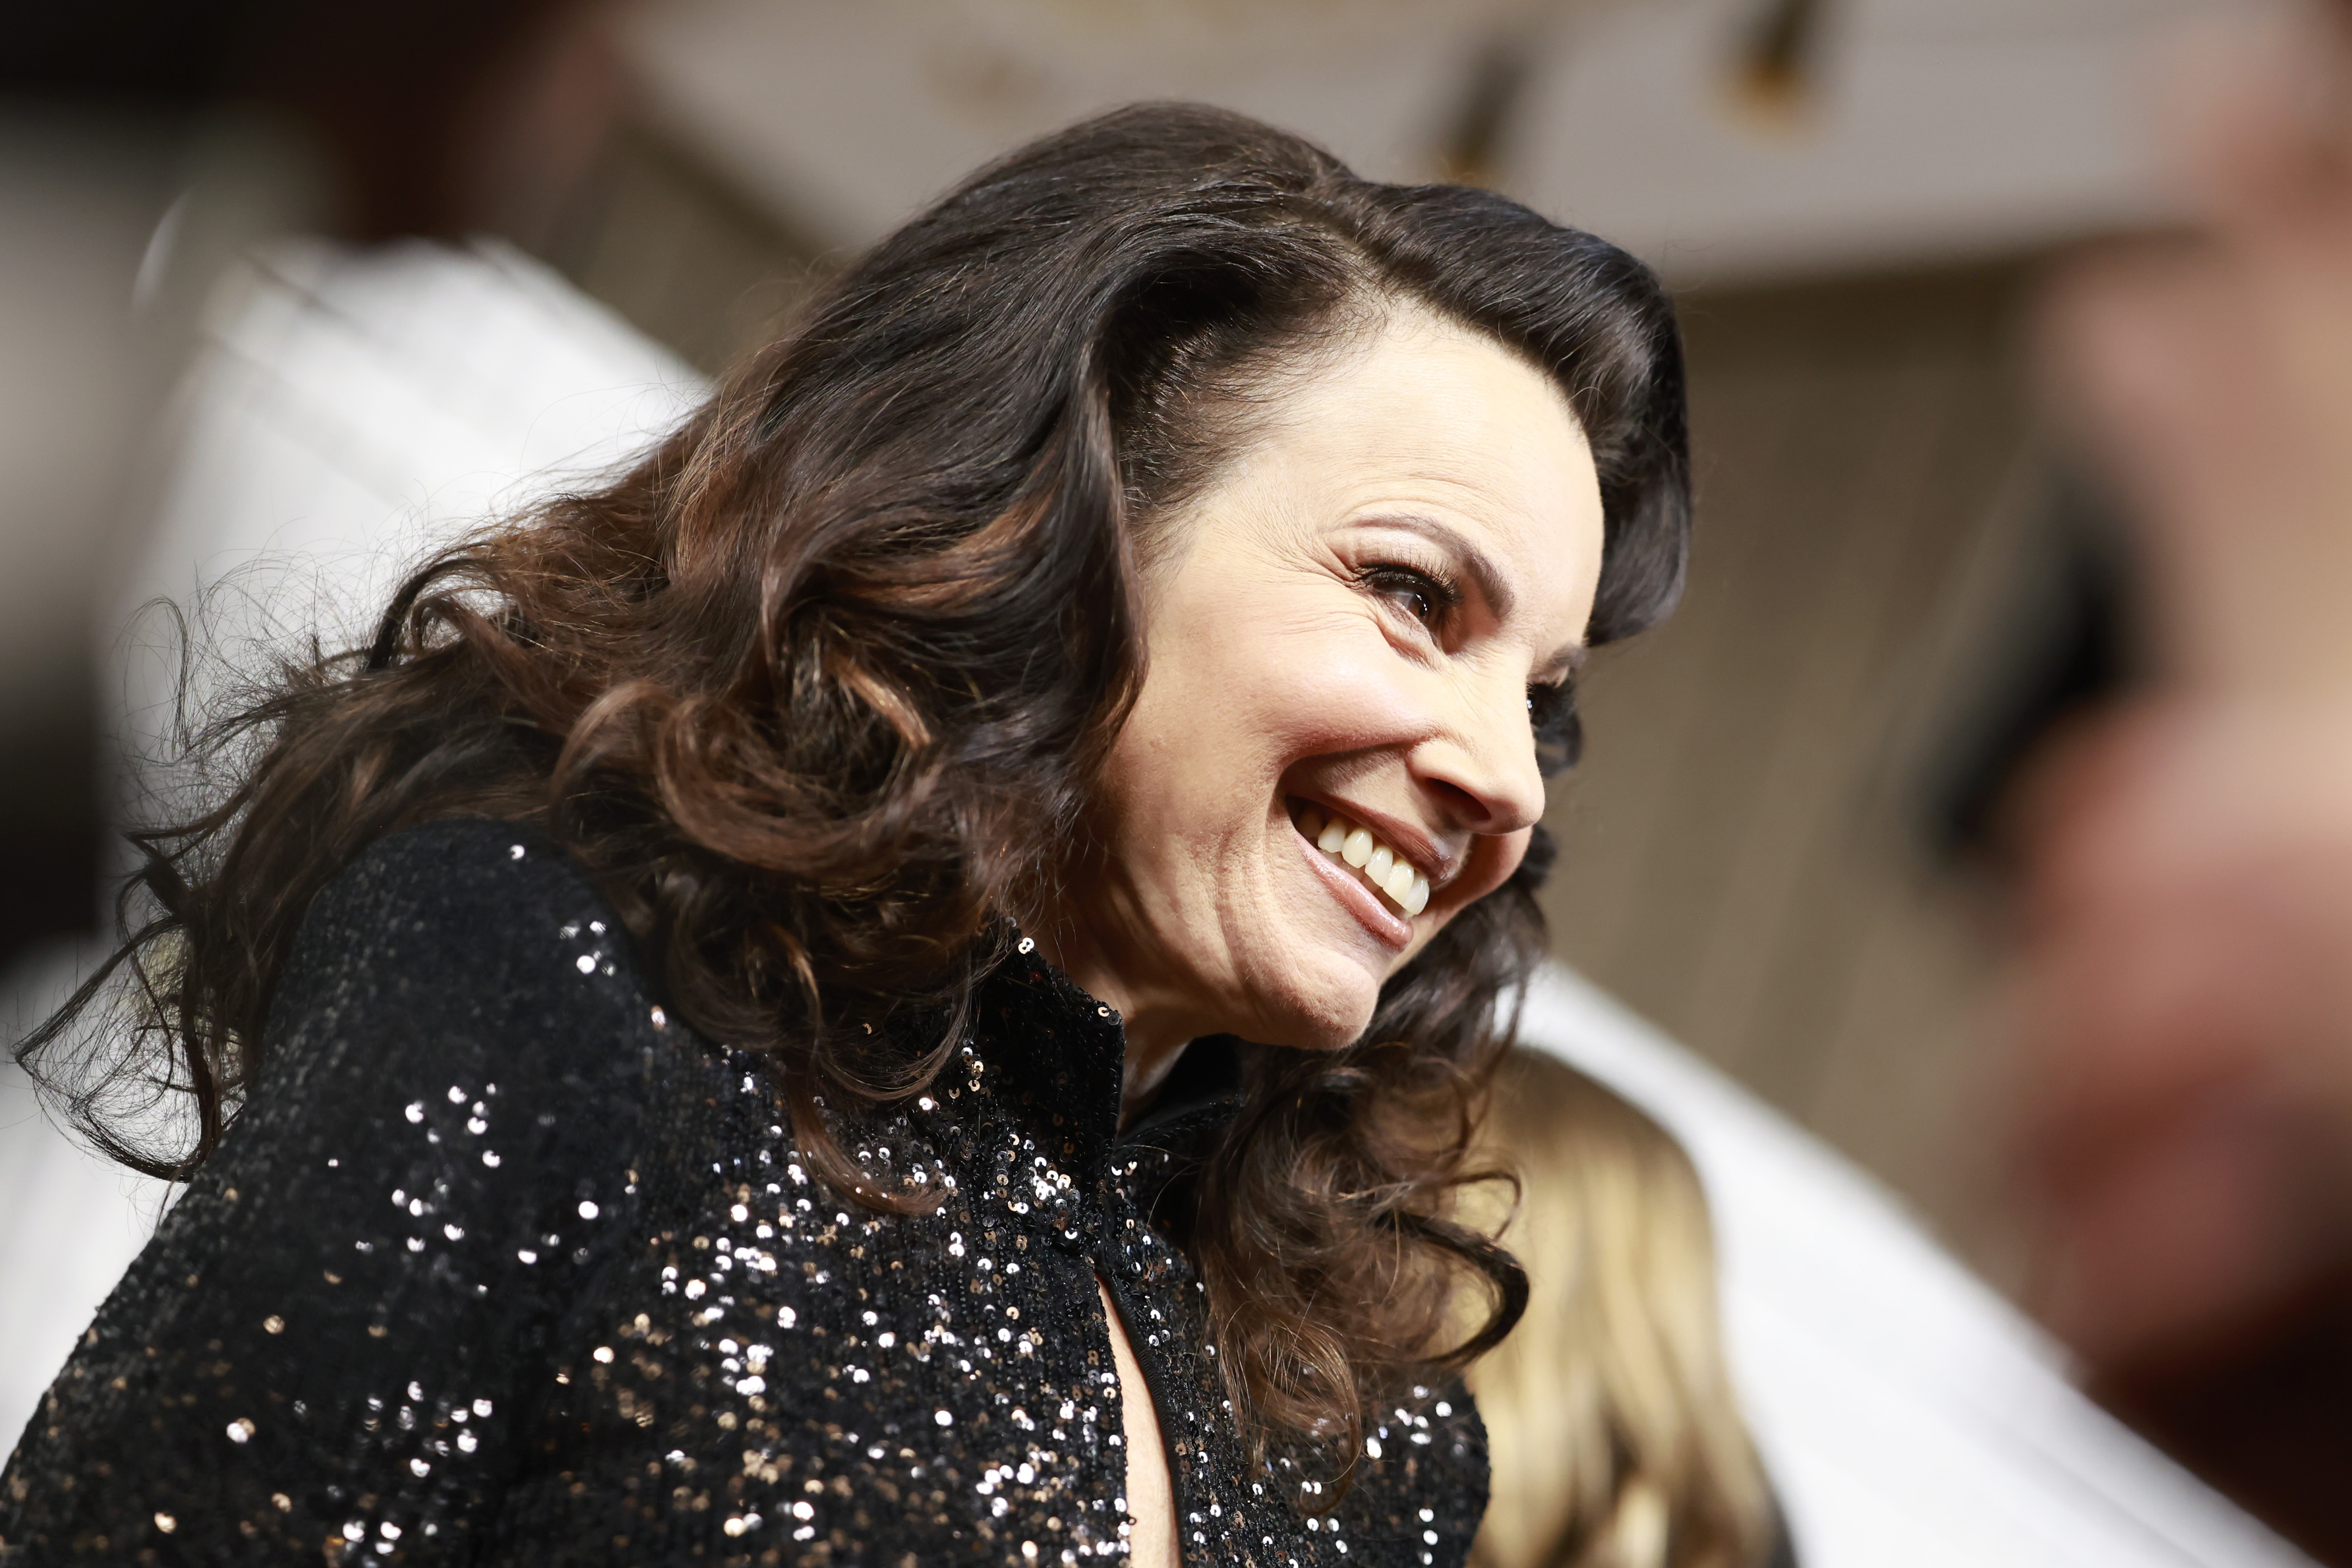 Fran Drescher, at the 29th Annual Screen Actors Guild Awards held at Fairmont Century Plaza in Los Angeles, California, on February 26, 2023. | Source: Getty Images